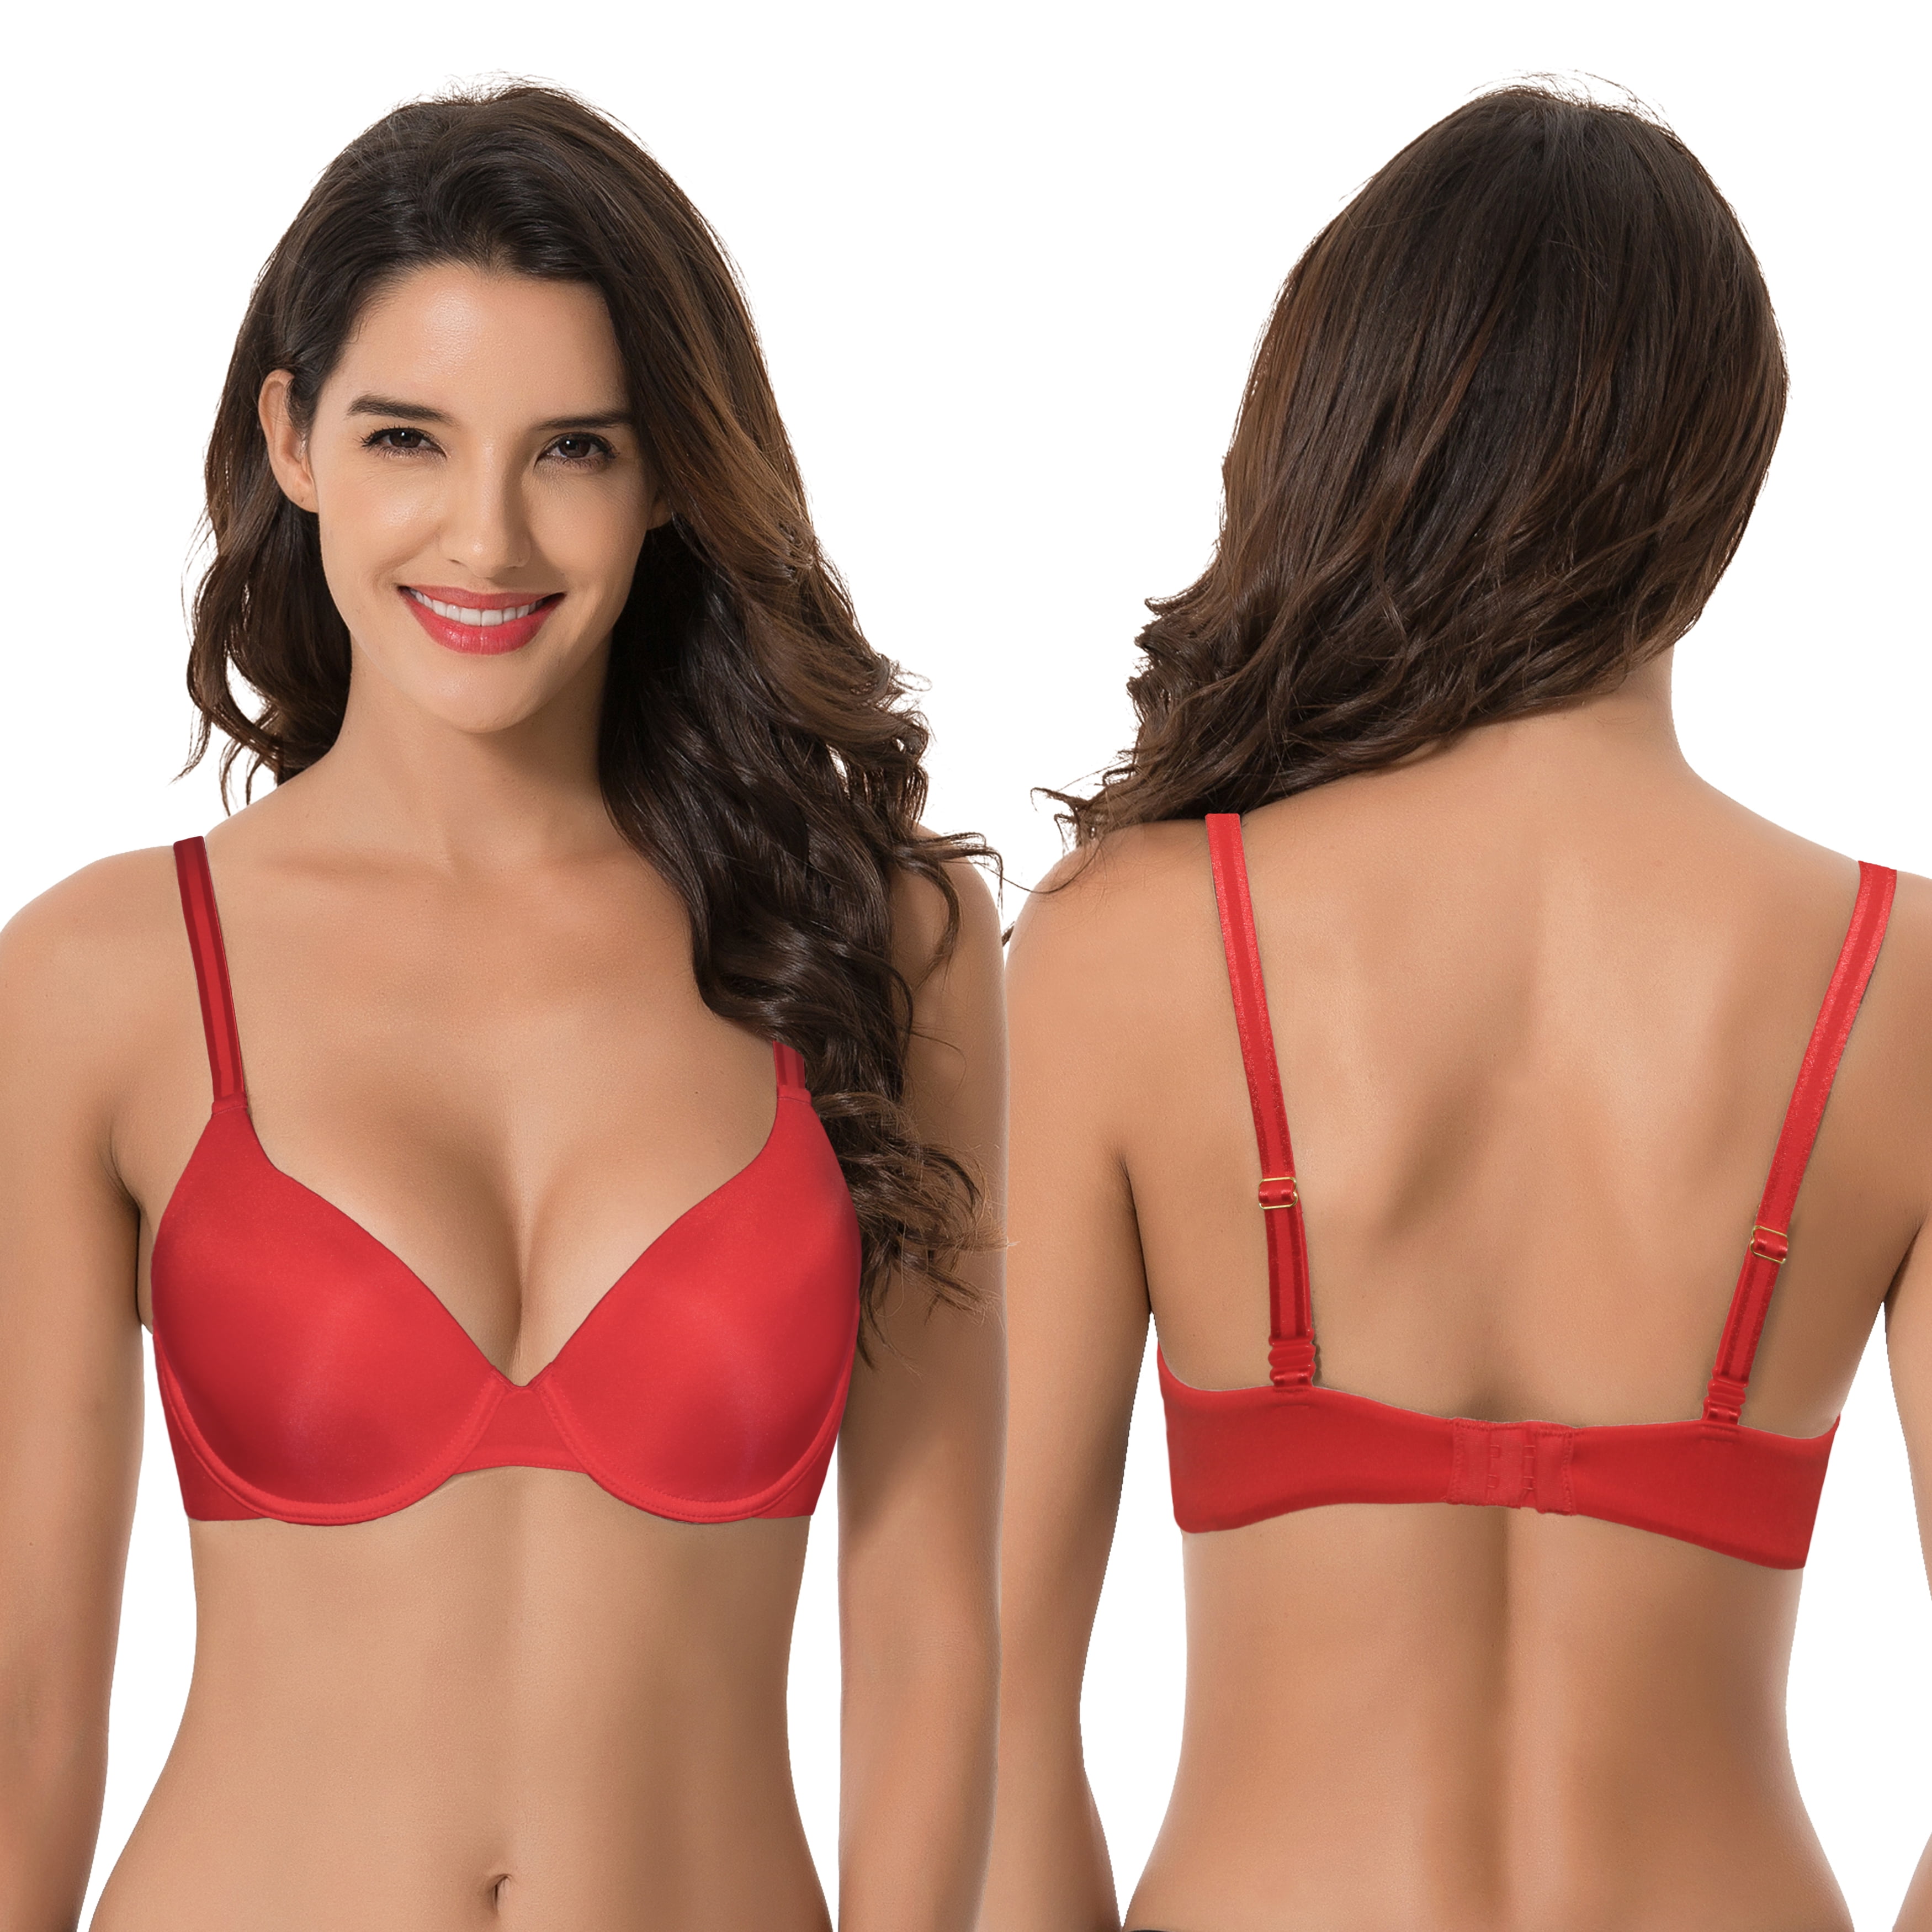 Curve Muse Women's Plus Size Full Coverage Padded Underwire Bra-2PK-NUDE ,RED-46C 